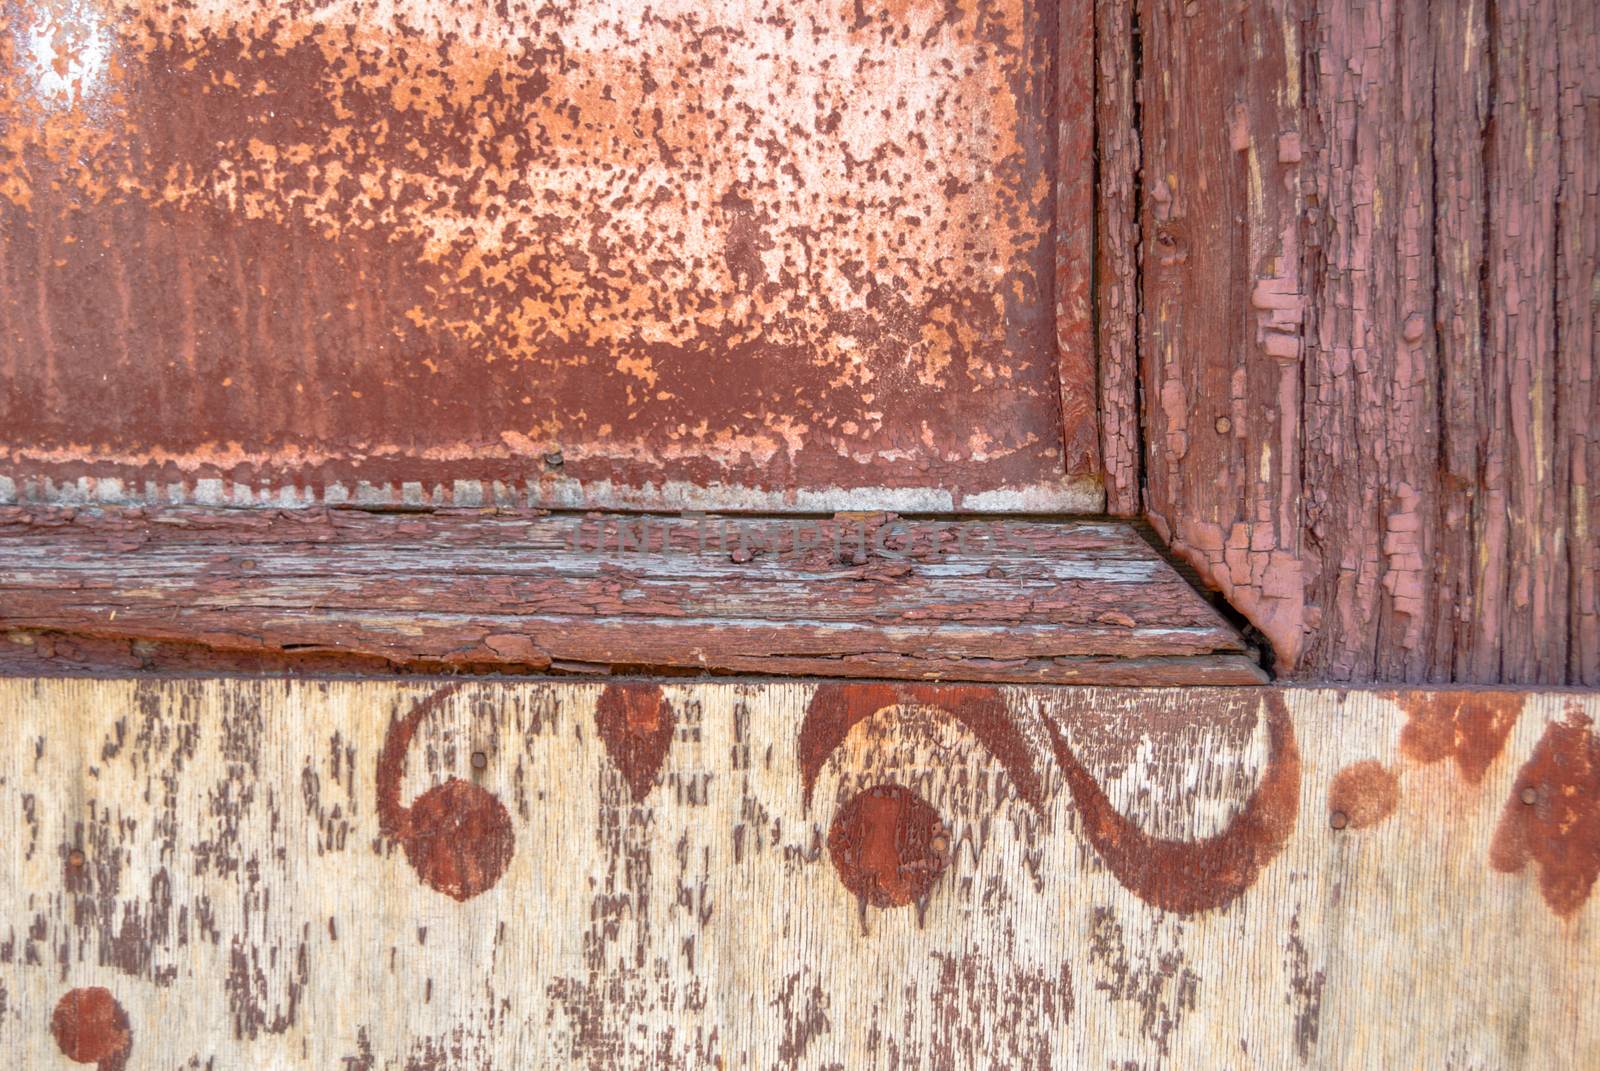 chipped paint on old wooden the door, great background or texture for your project by uvisni